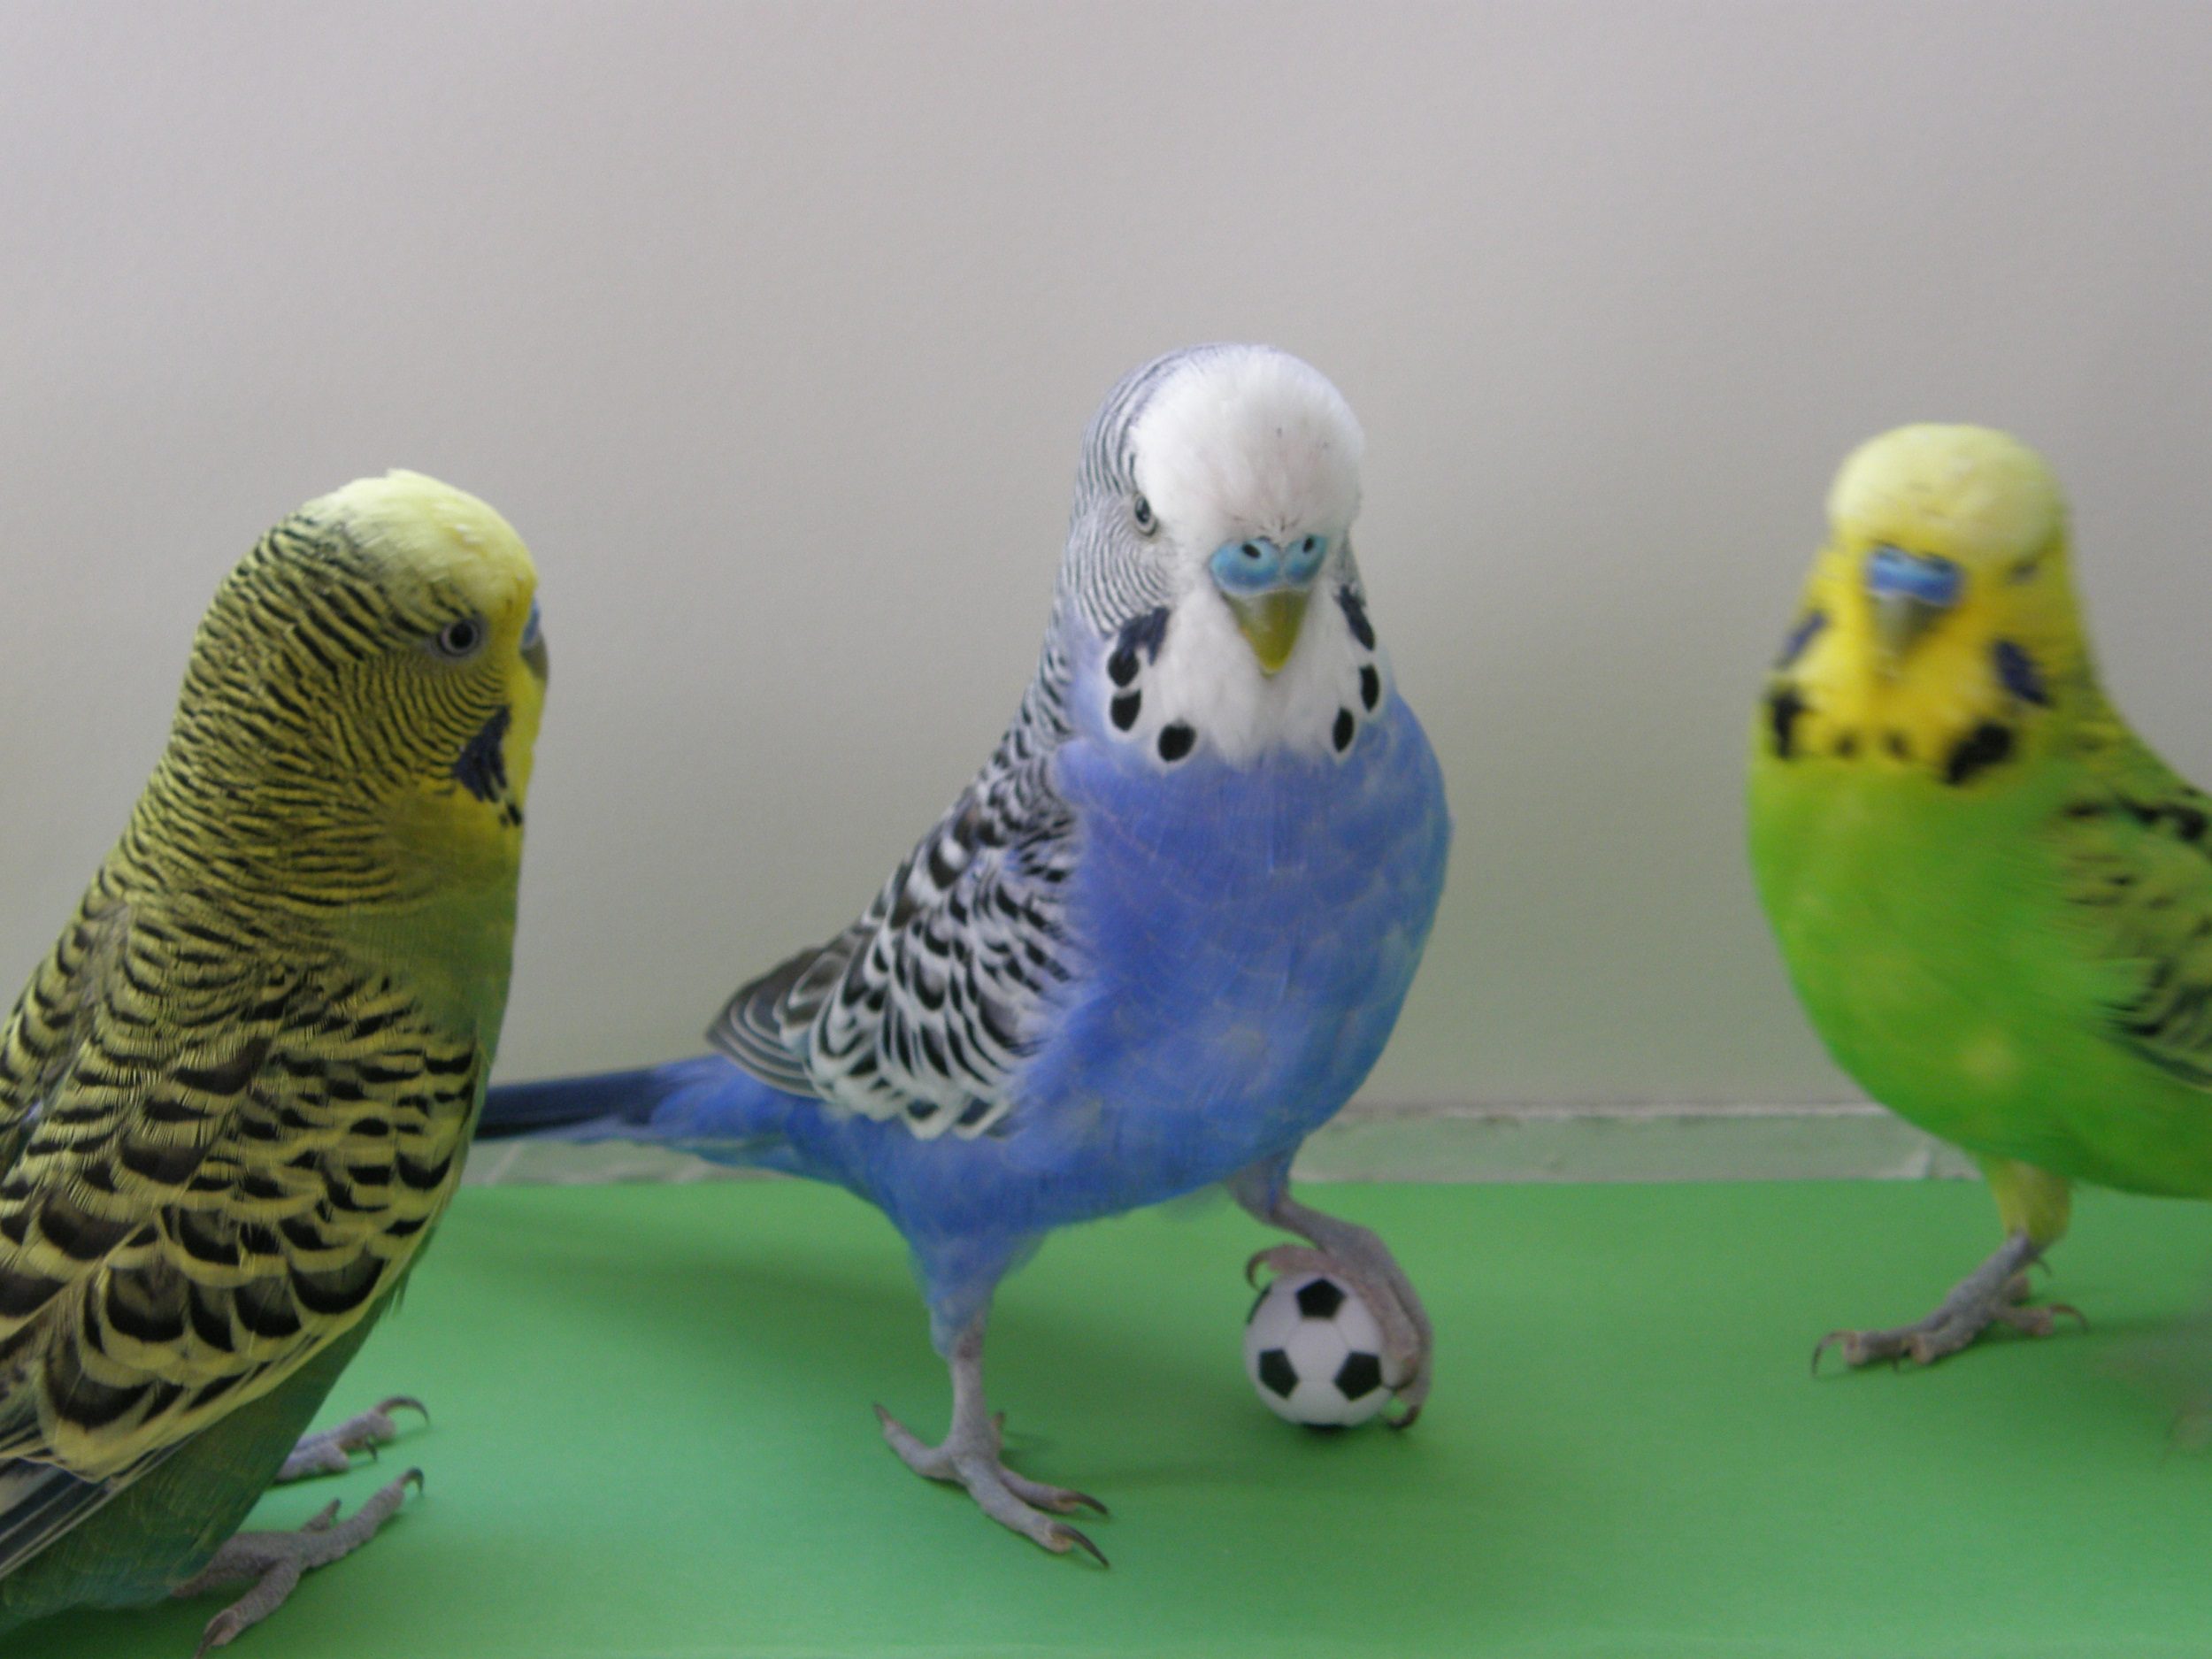 Everything you need to know about the emergence and cultivation of small budgerigars